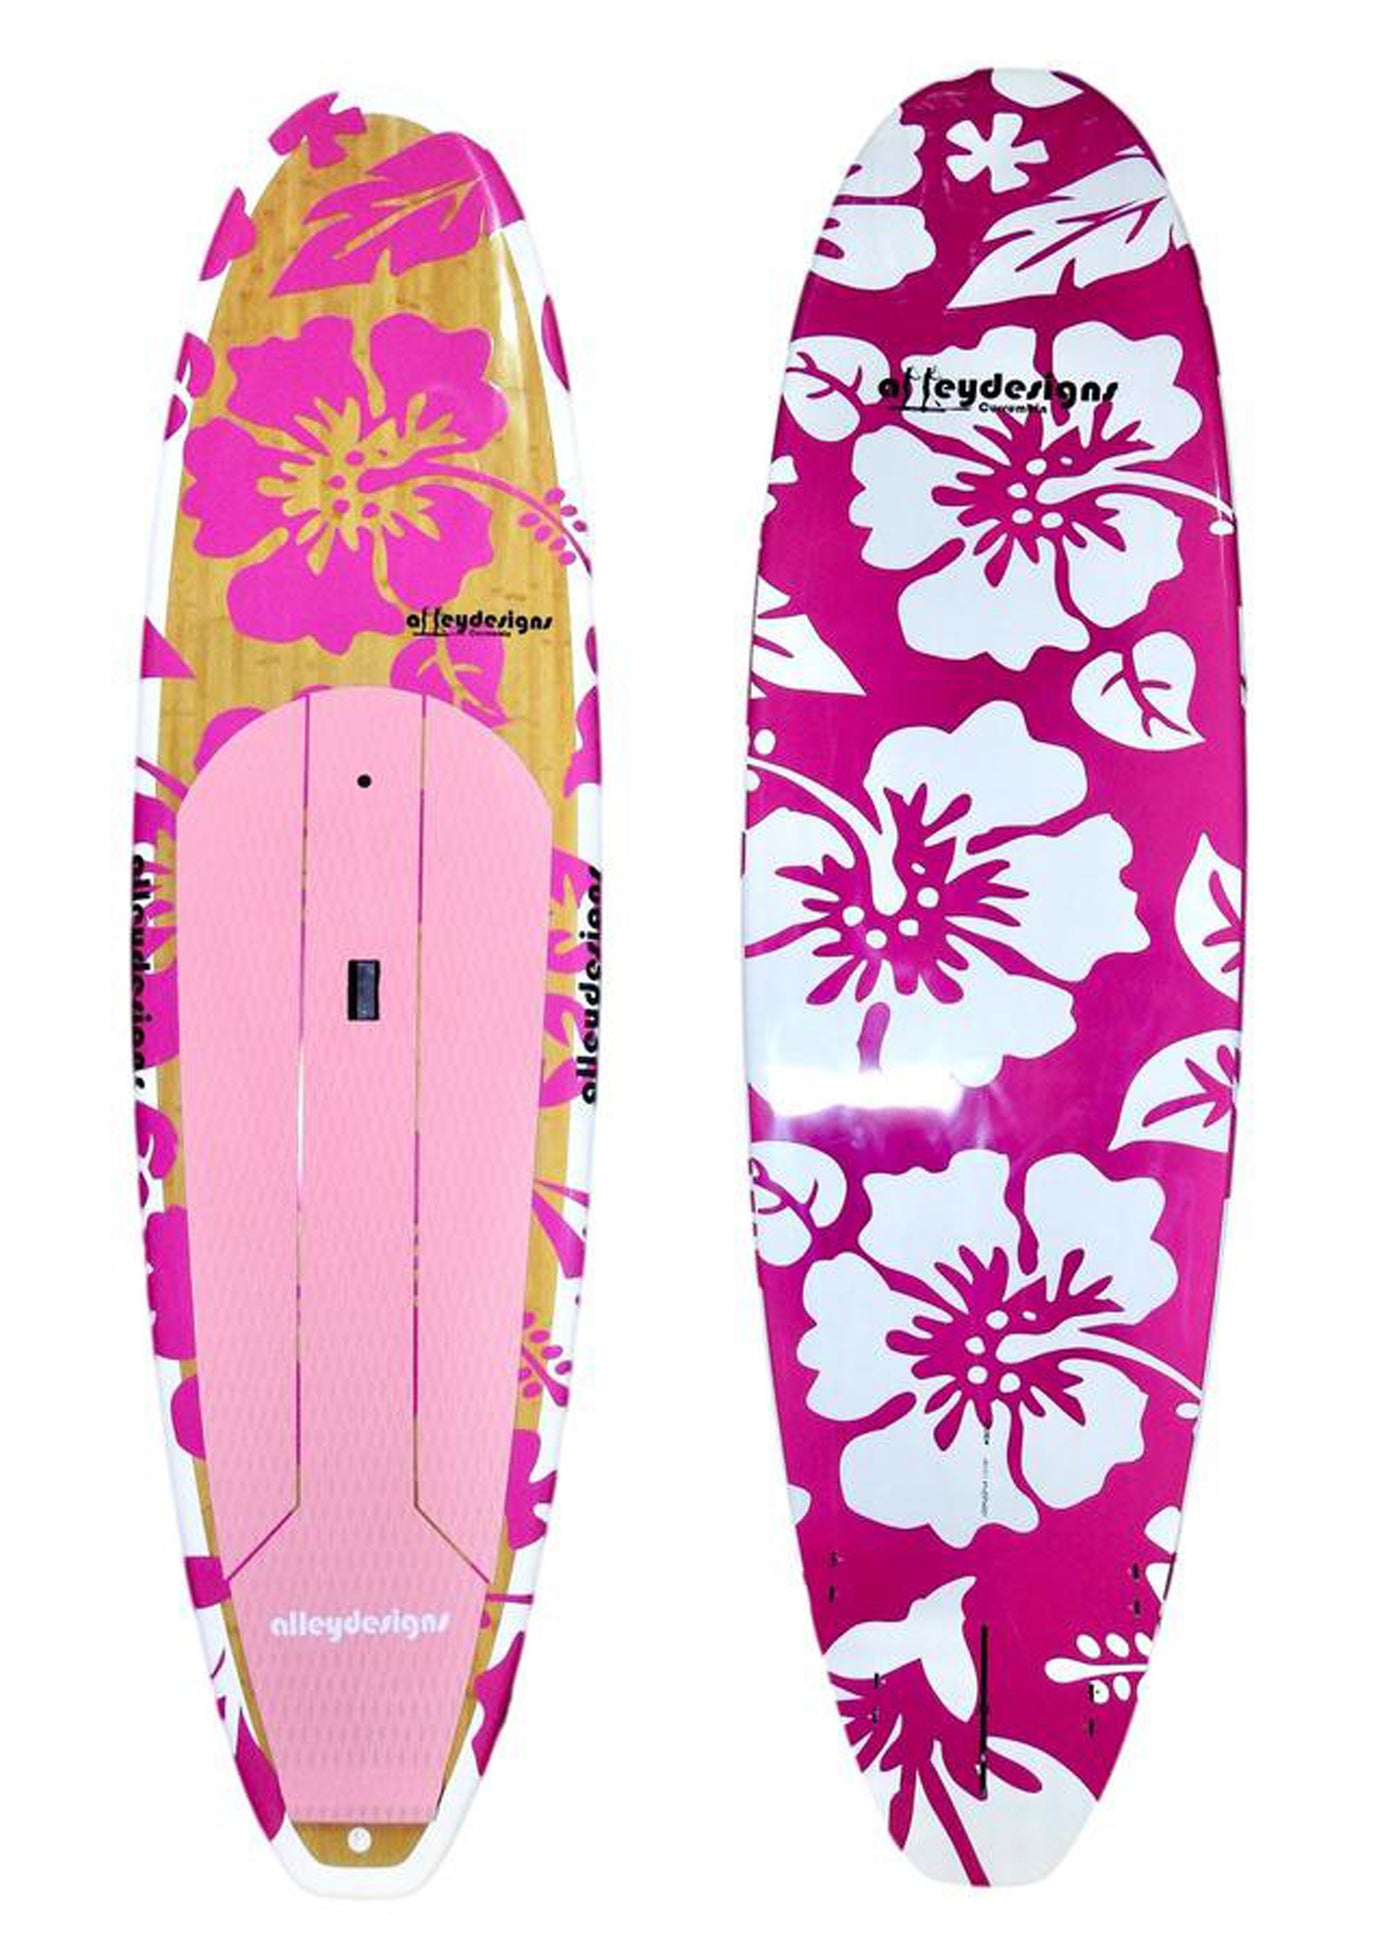 10' x 32" Bamboo Deck Classic Pink Hibiscus  Alleydesigns SUP@ 9kg - Alleydesigns  Pty Ltd                                             ABN: 44165571264